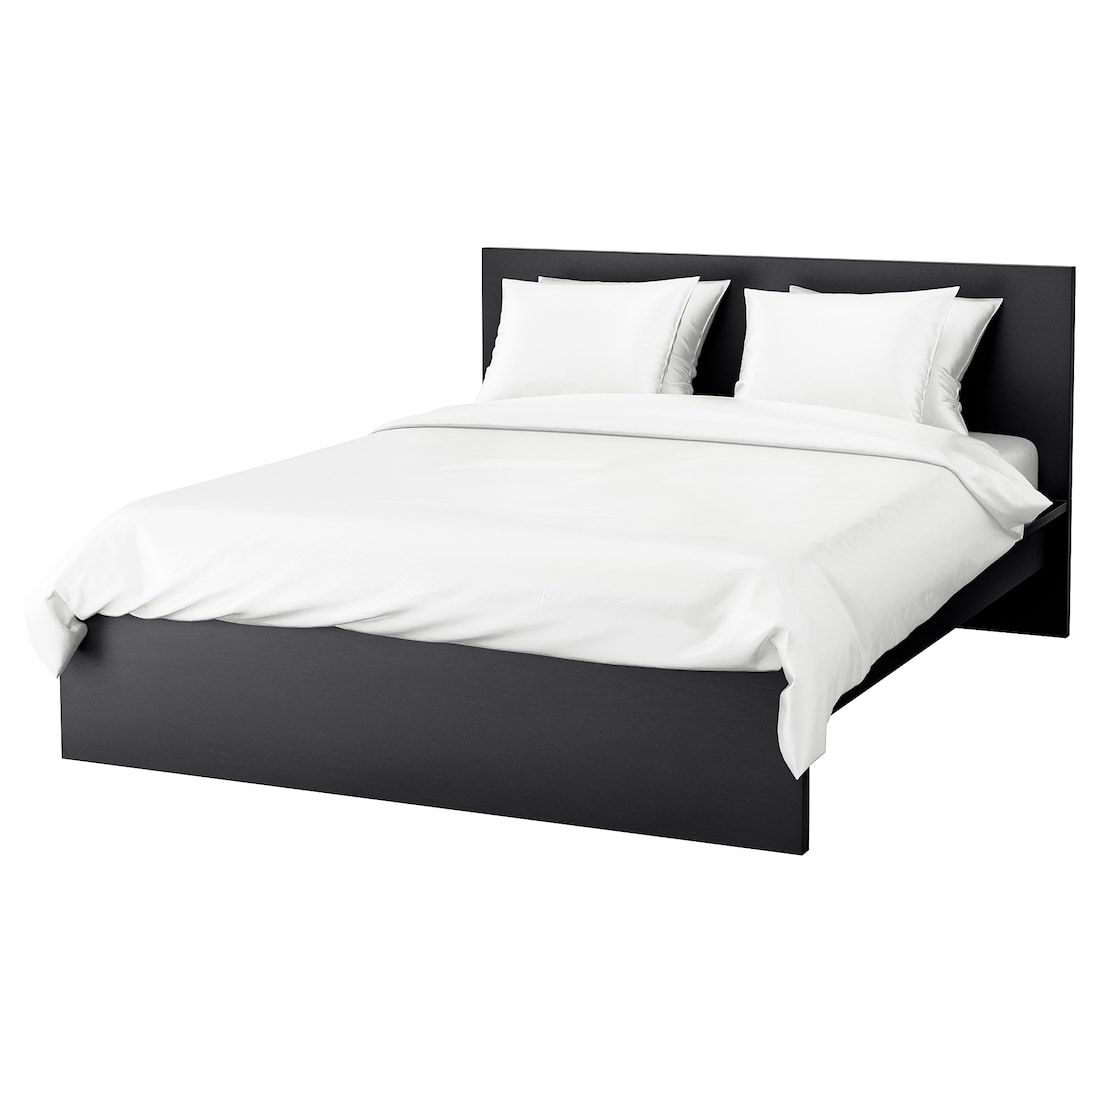 Malm IKEA bed Frame and Sealy Mattress Full size